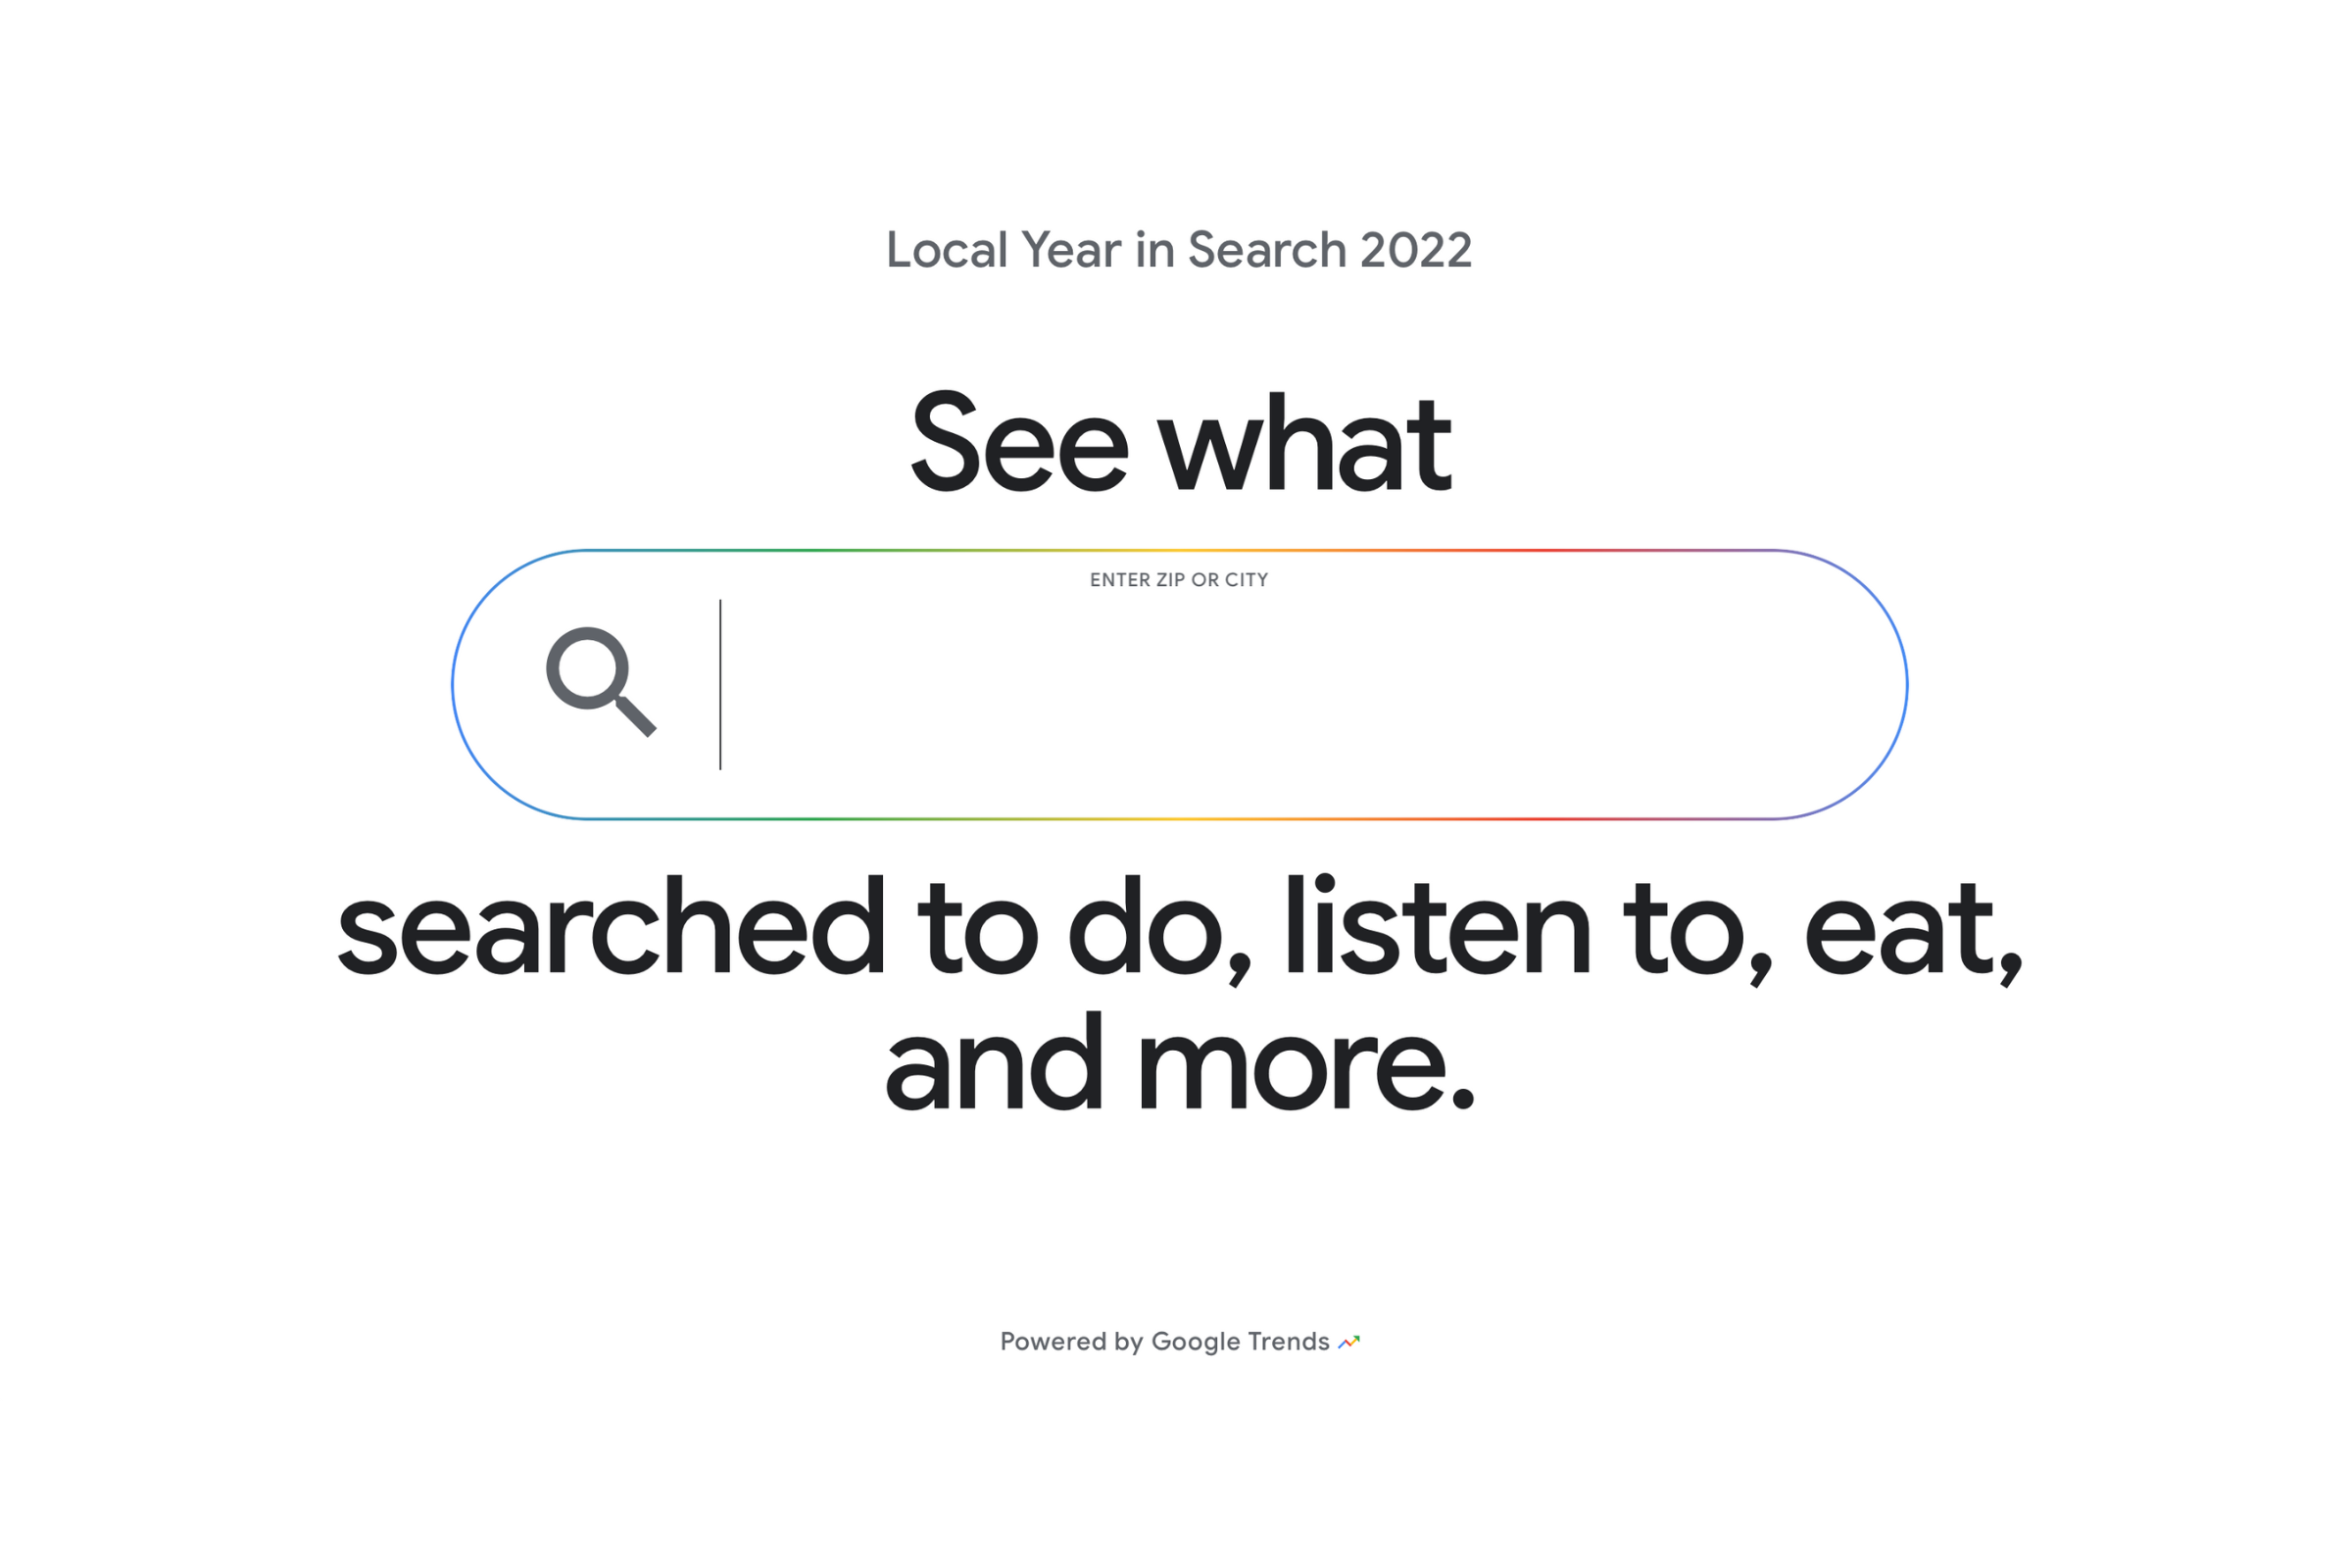 Google's Year in 2022 goes local for the first time, showing trends